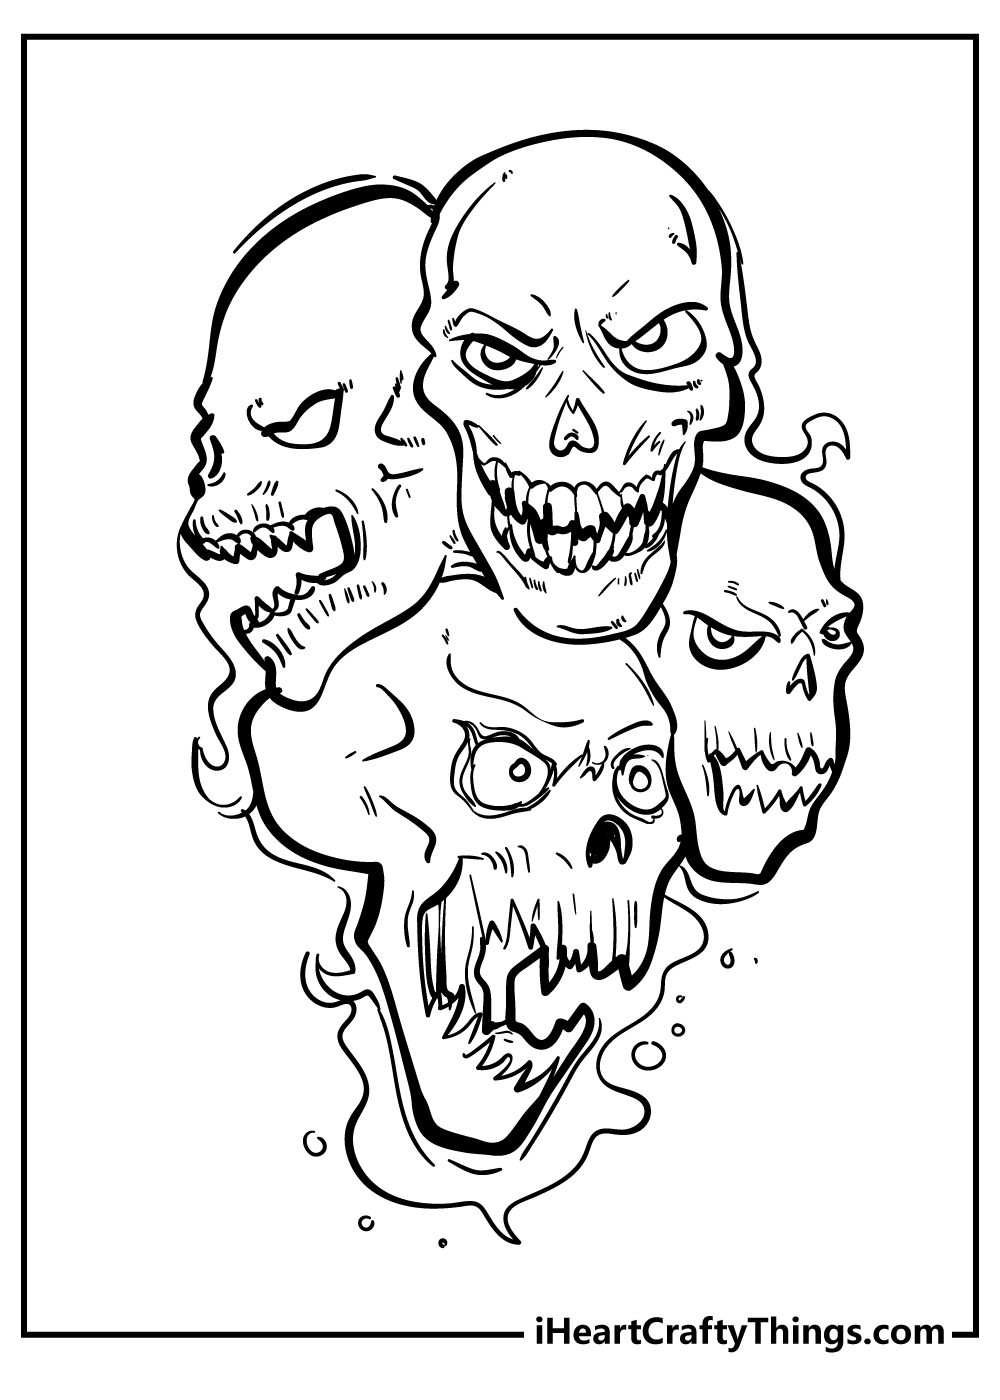 Spooky Coloring Pages free pdf download